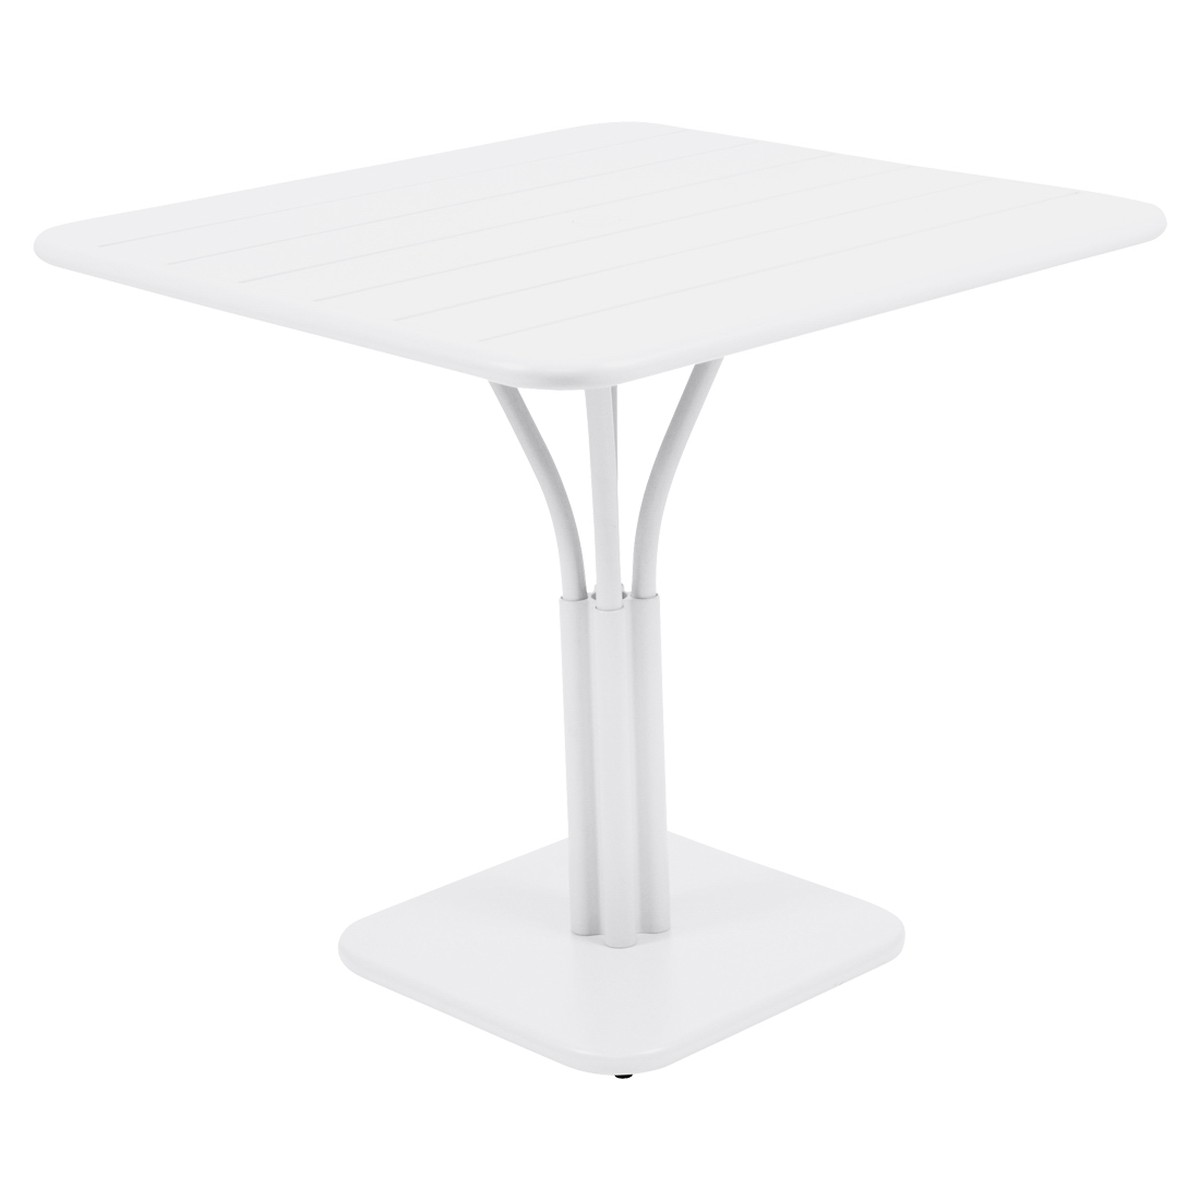 Fermob Luxembourg Table Luxembourg carrée pied central Blanc L 80 x l 80 x H74cm